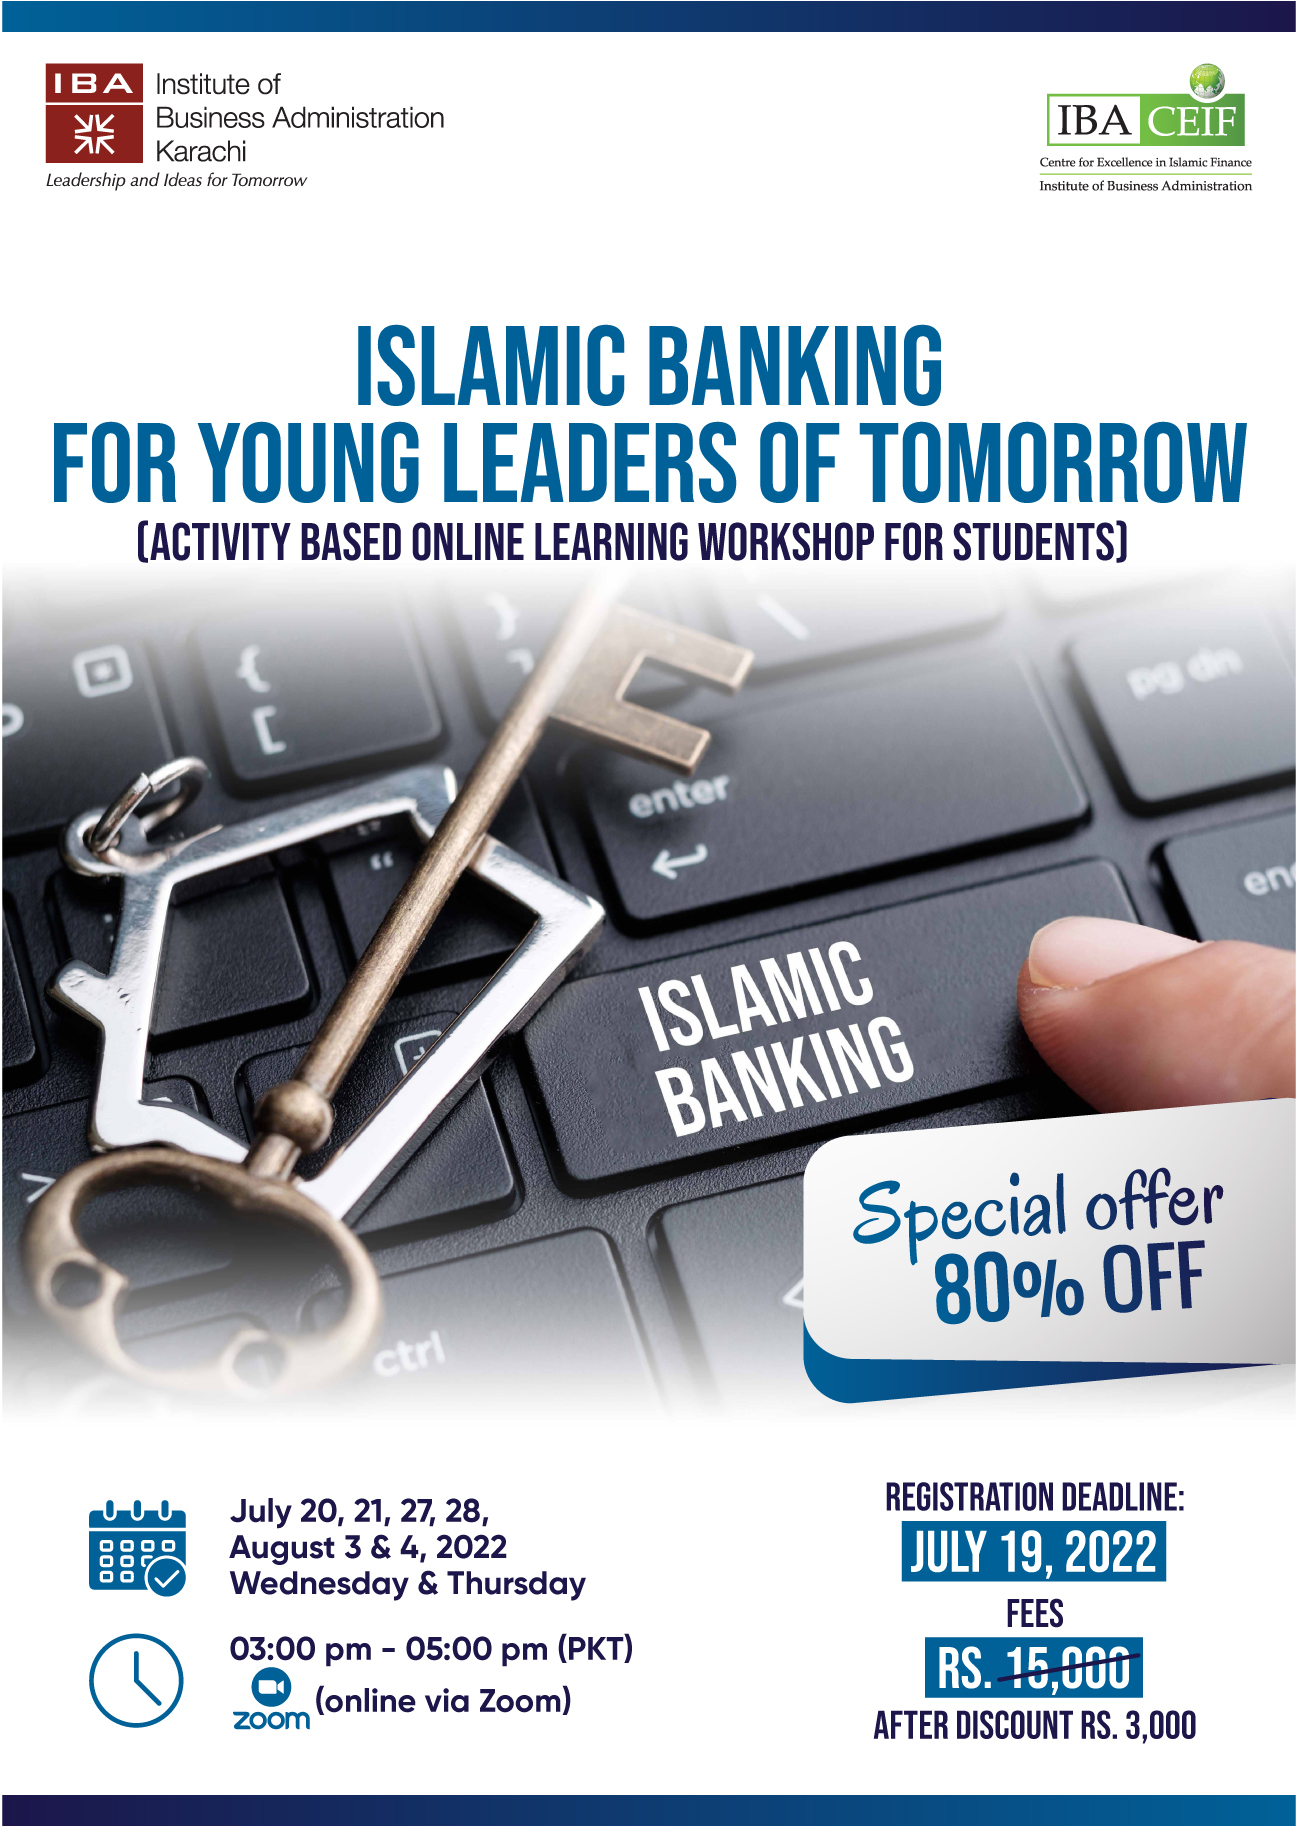 Islamic Banking for Young Leaders for Tomorrow